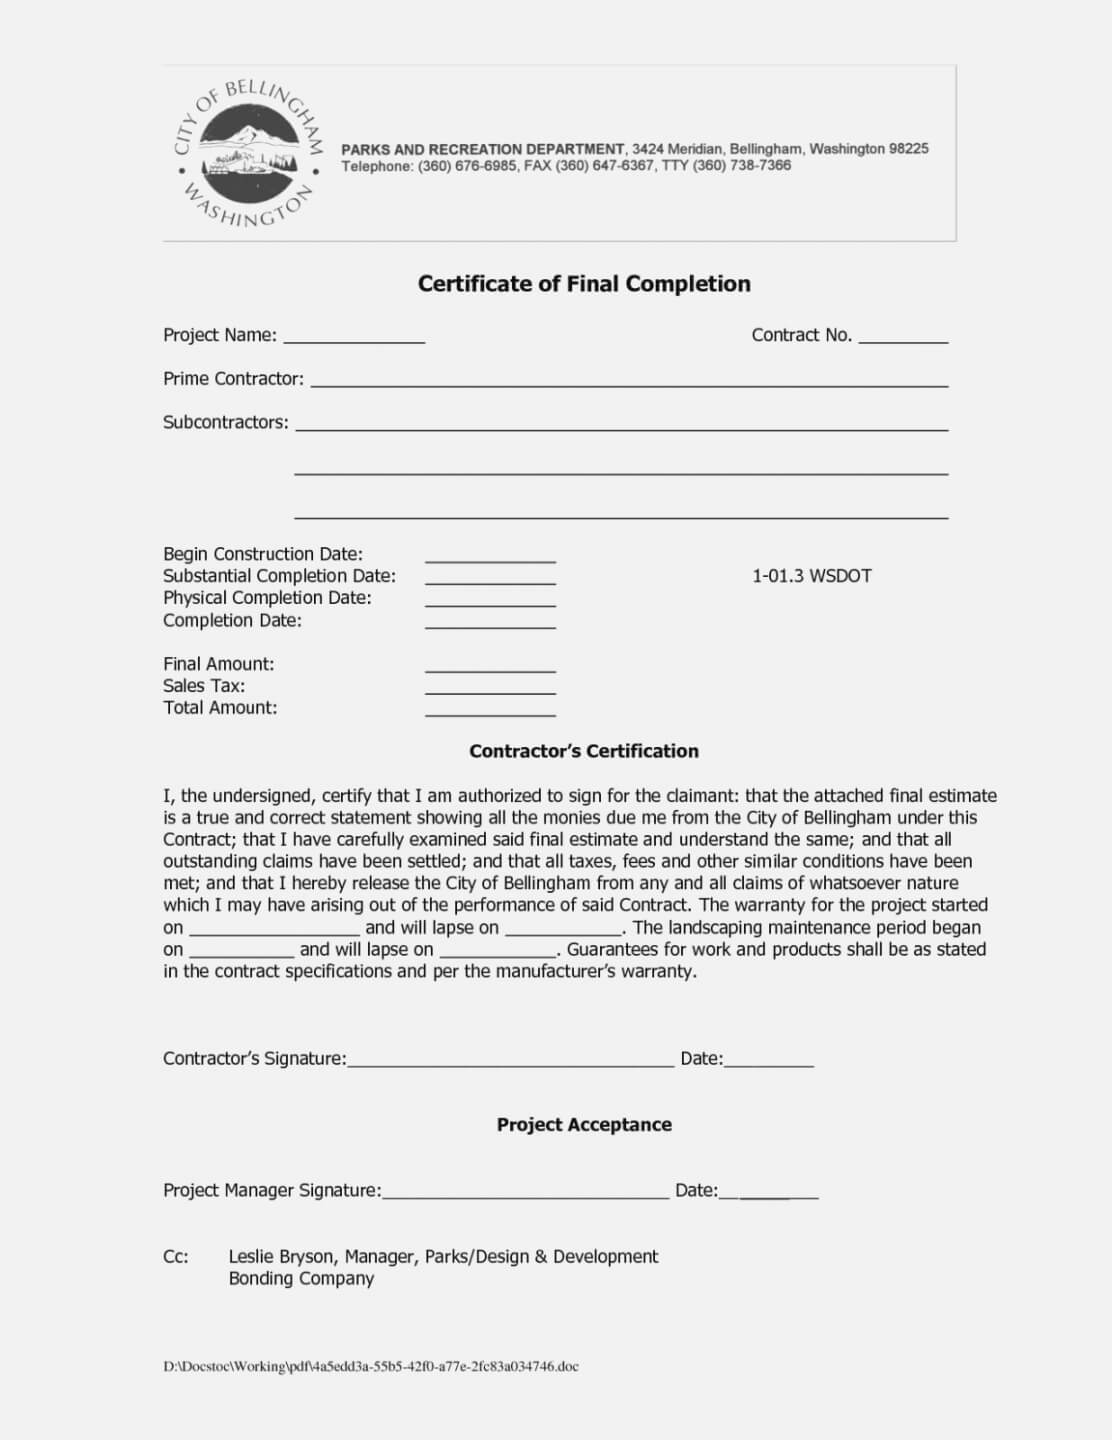 Roofing Certificate Of Completion Template – Zimer.bwong.co With Regard To Certificate Of Substantial Completion Template